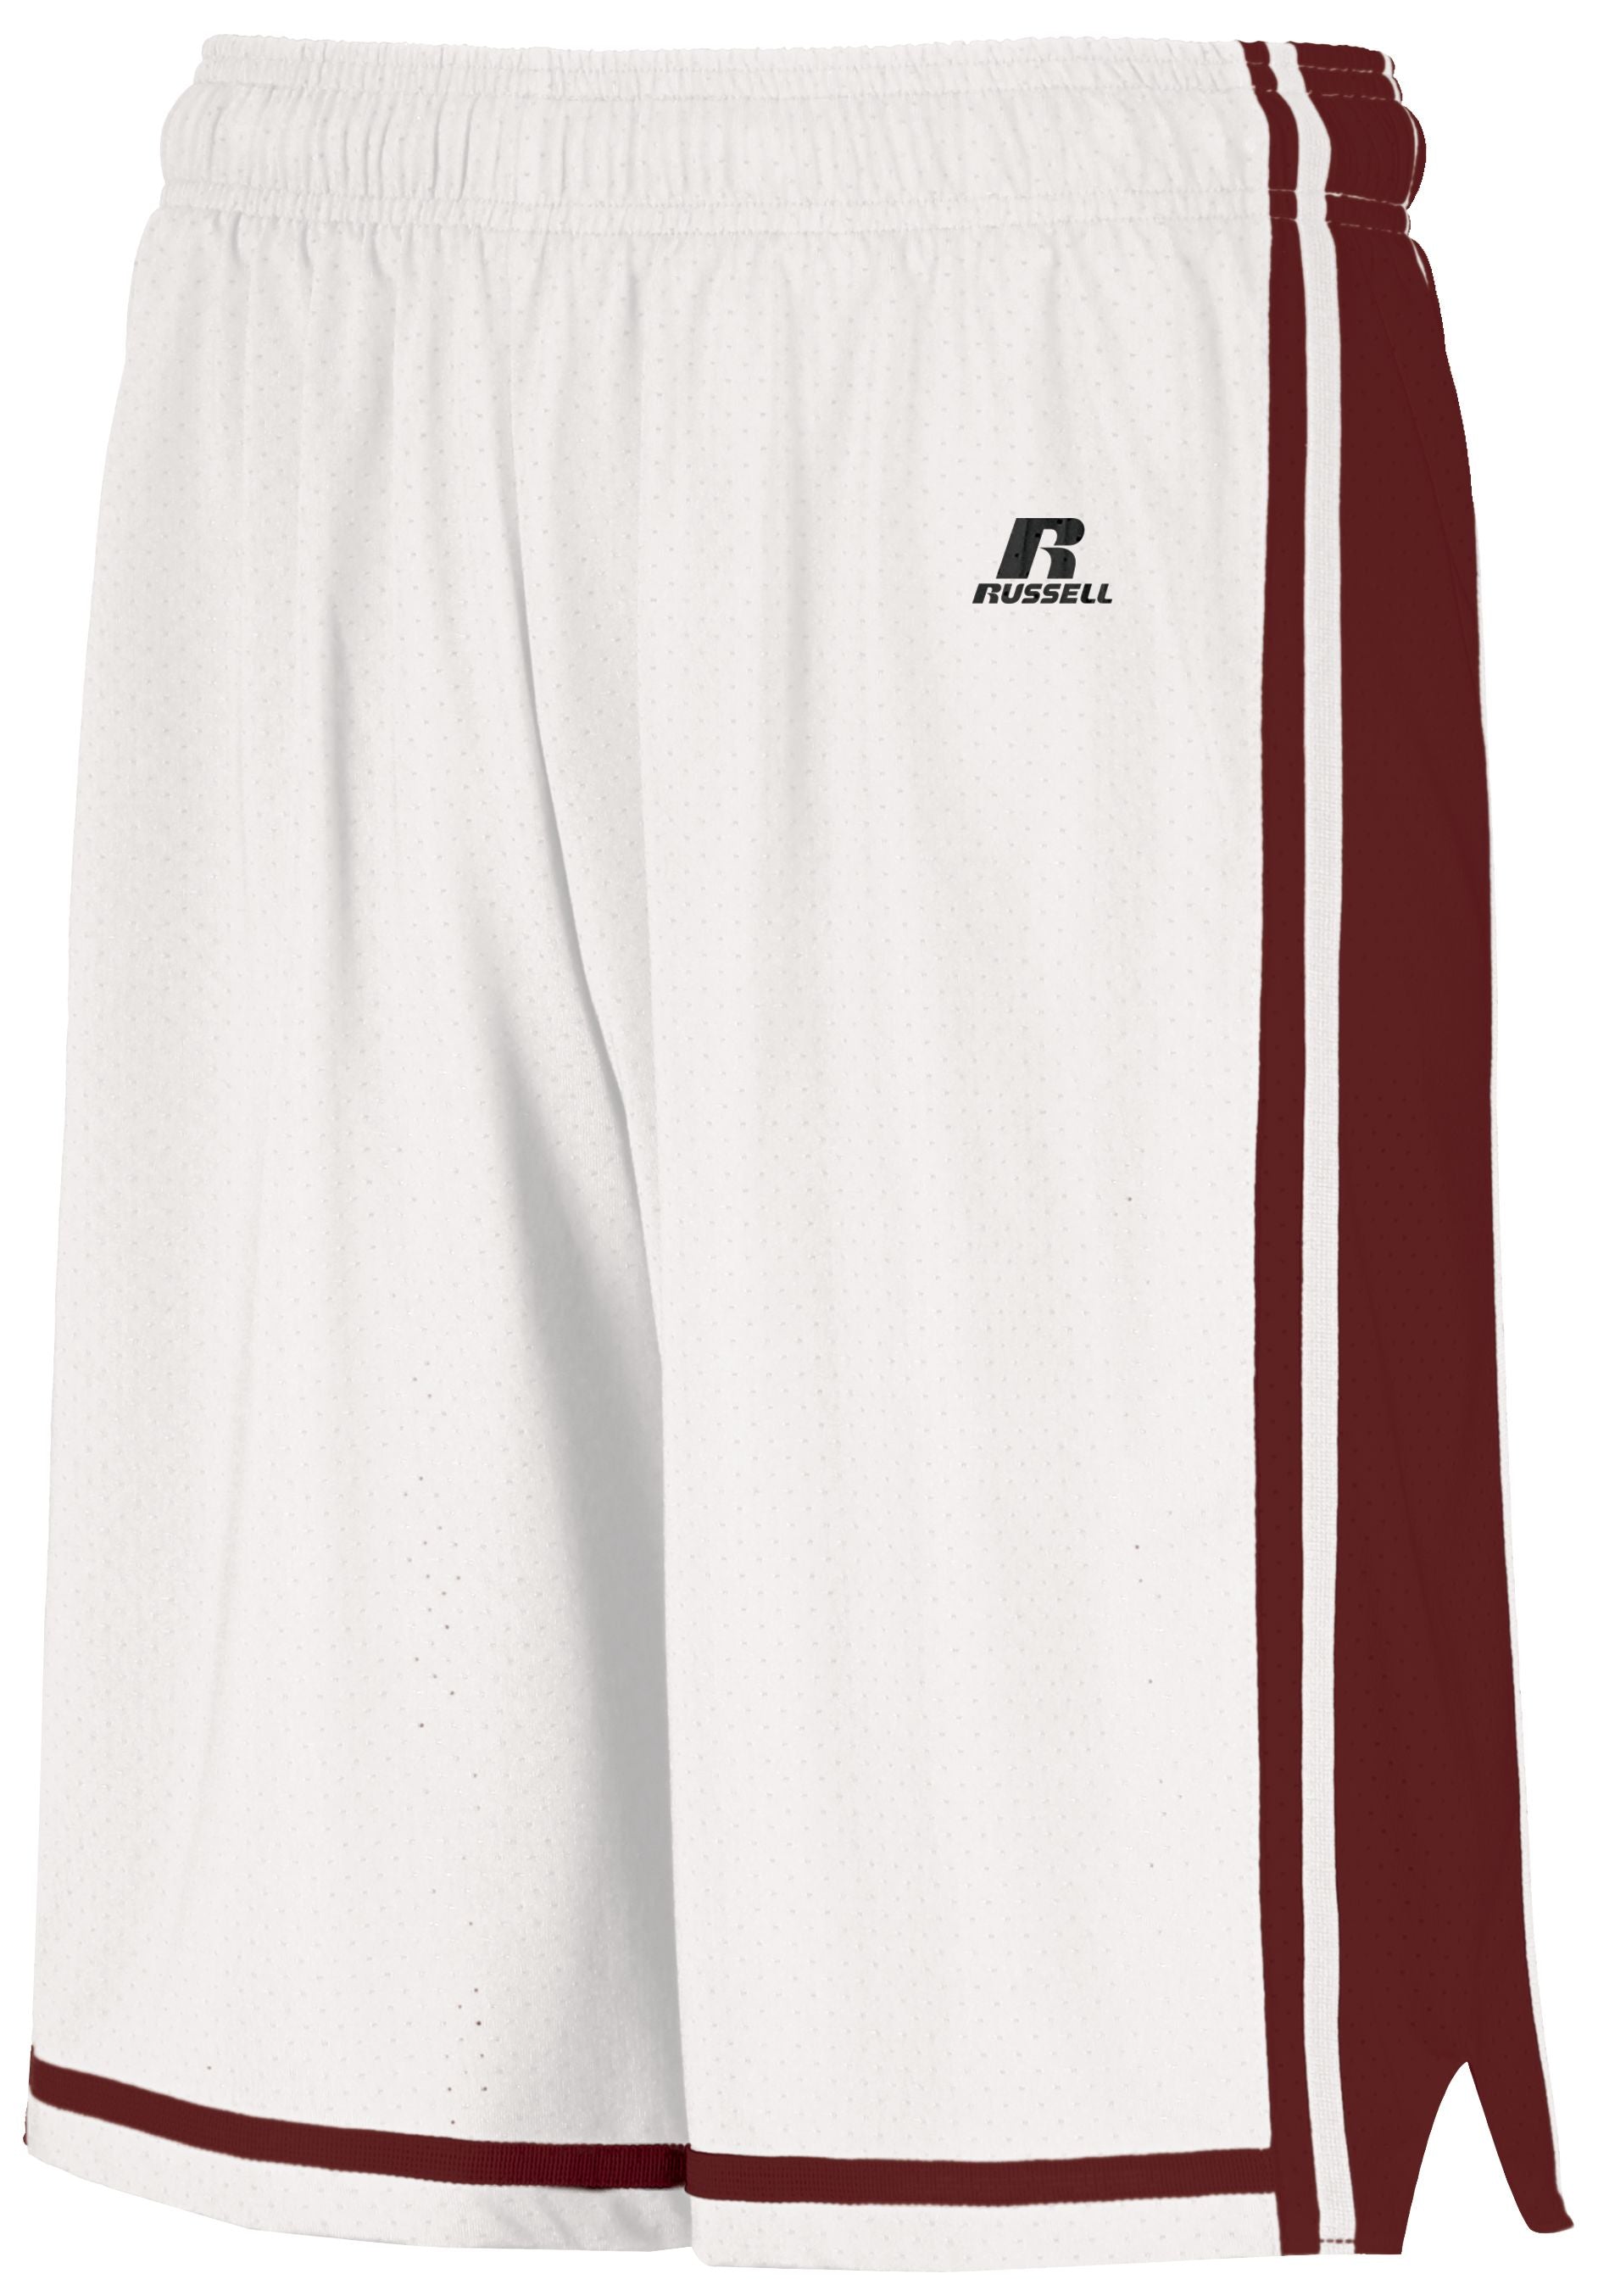 Russell Athletic Legacy Basketball Shorts in White/Cardinal  -Part of the Adult, Adult-Shorts, Basketball, Russell-Athletic-Products, All-Sports, All-Sports-1 product lines at KanaleyCreations.com